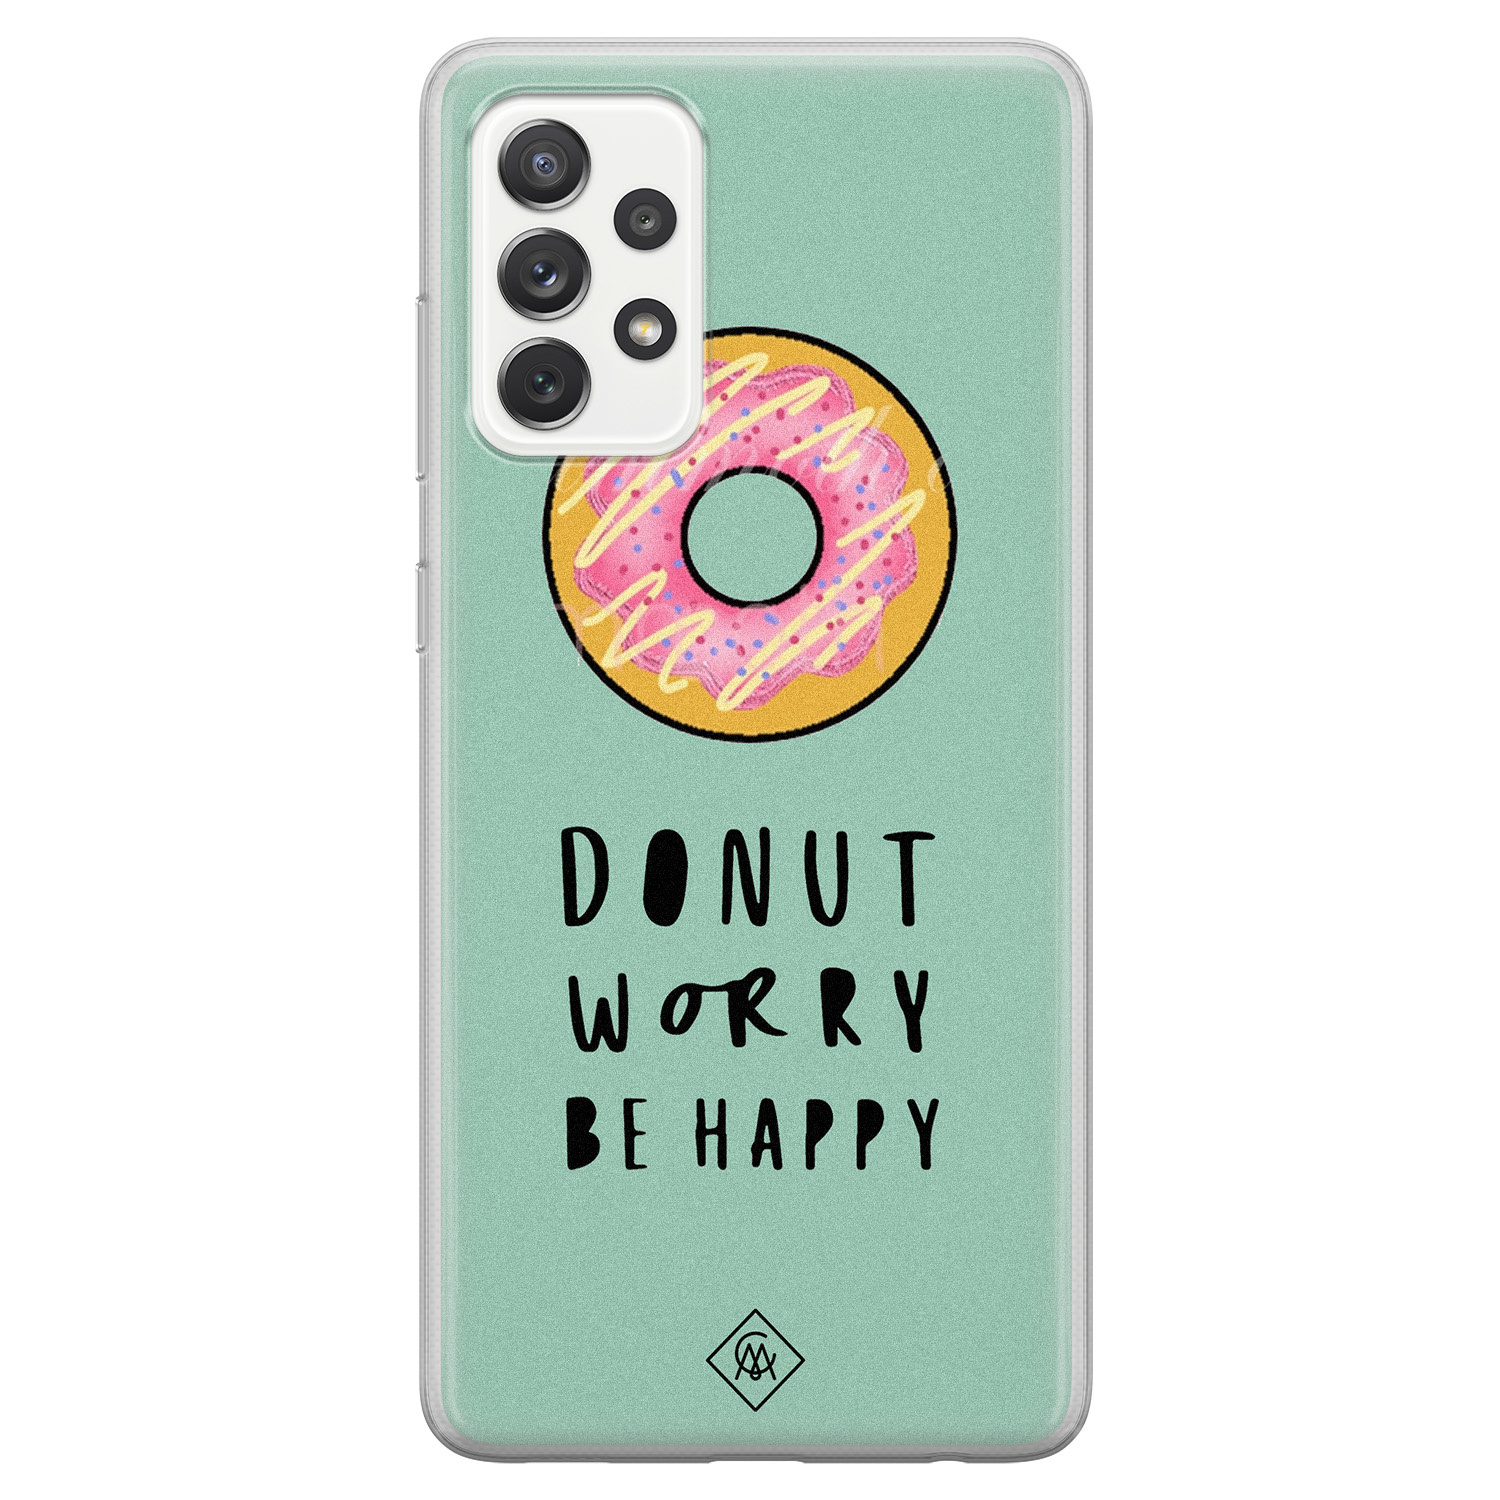 Samsung Galaxy A52s siliconen hoesje - Donut worry